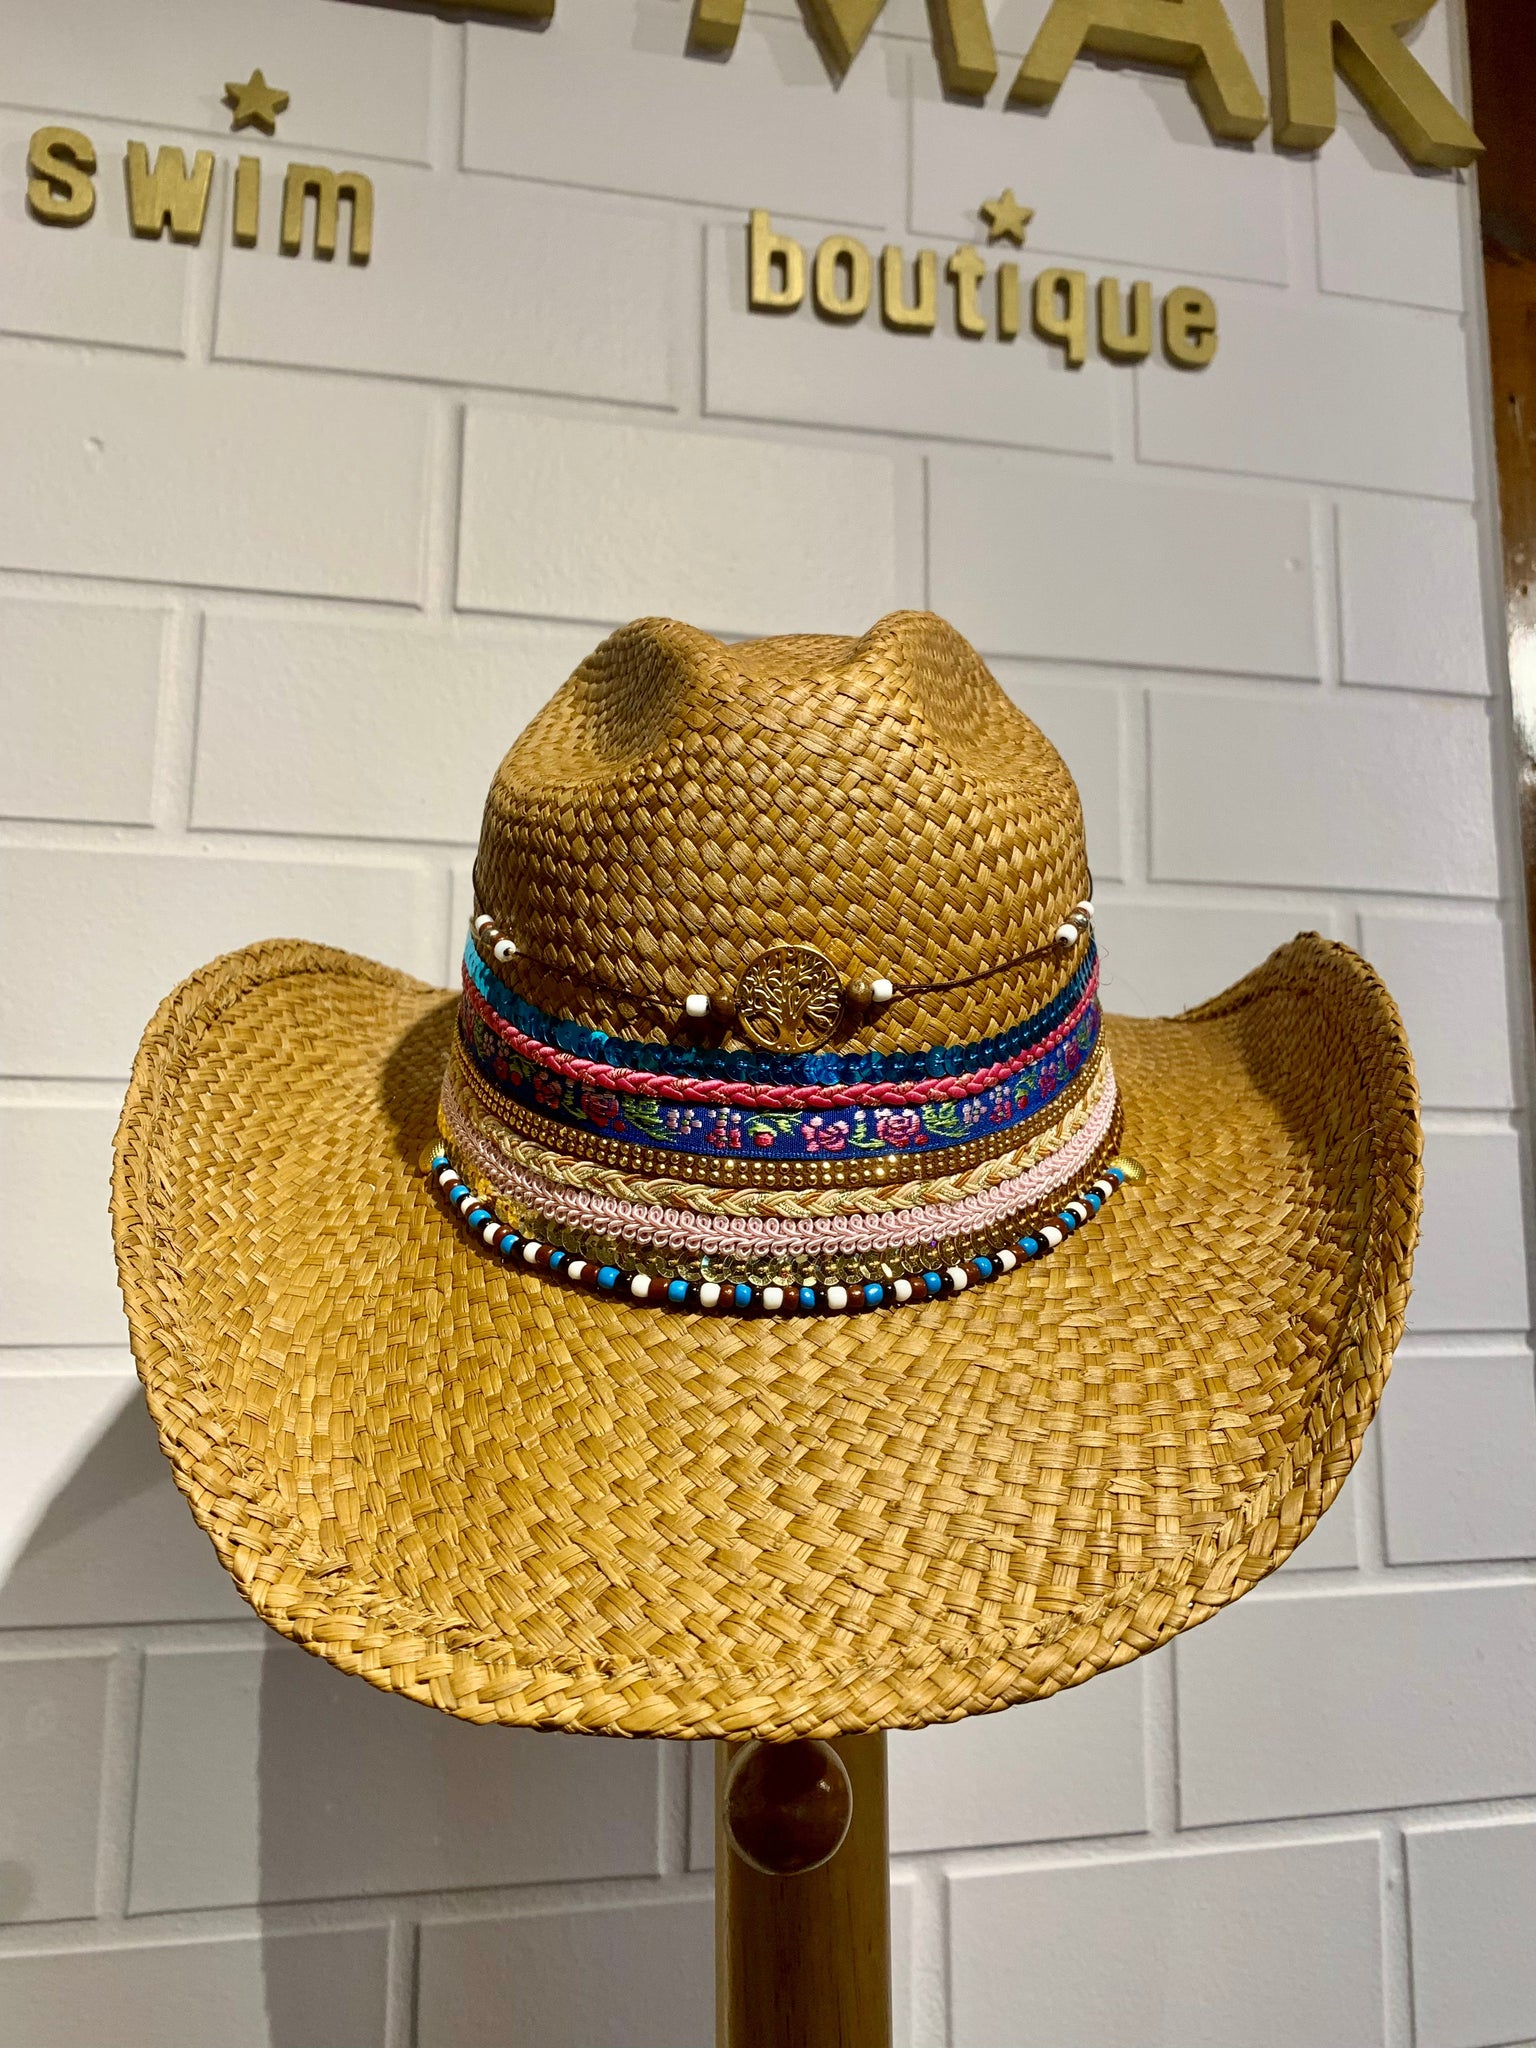 Handcrafted cowboy hats, new styles